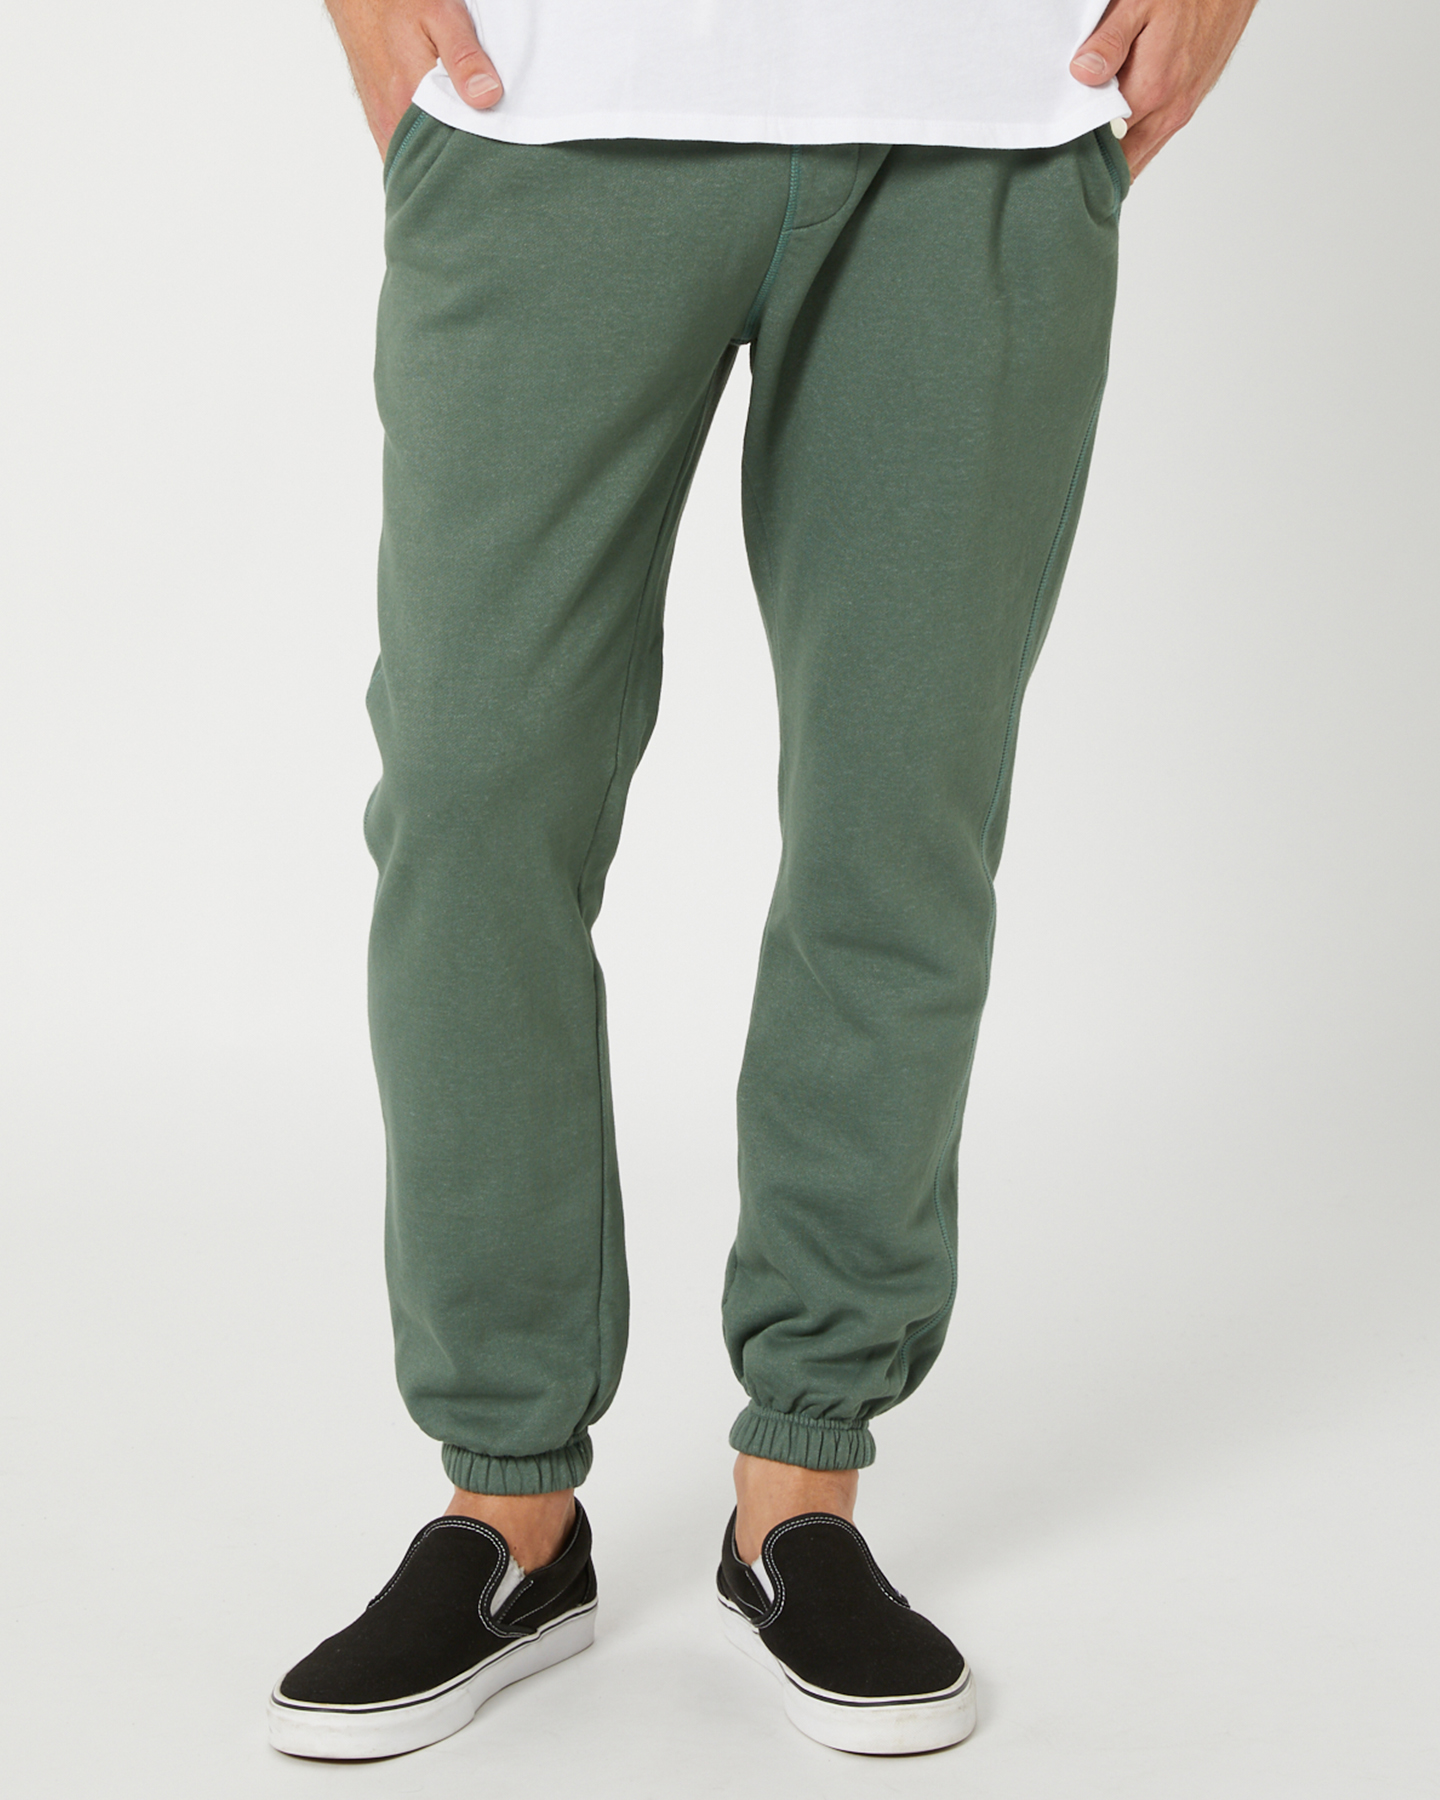 Depactus Balance Non Toxic Track Pant - Olive Green | SurfStitch